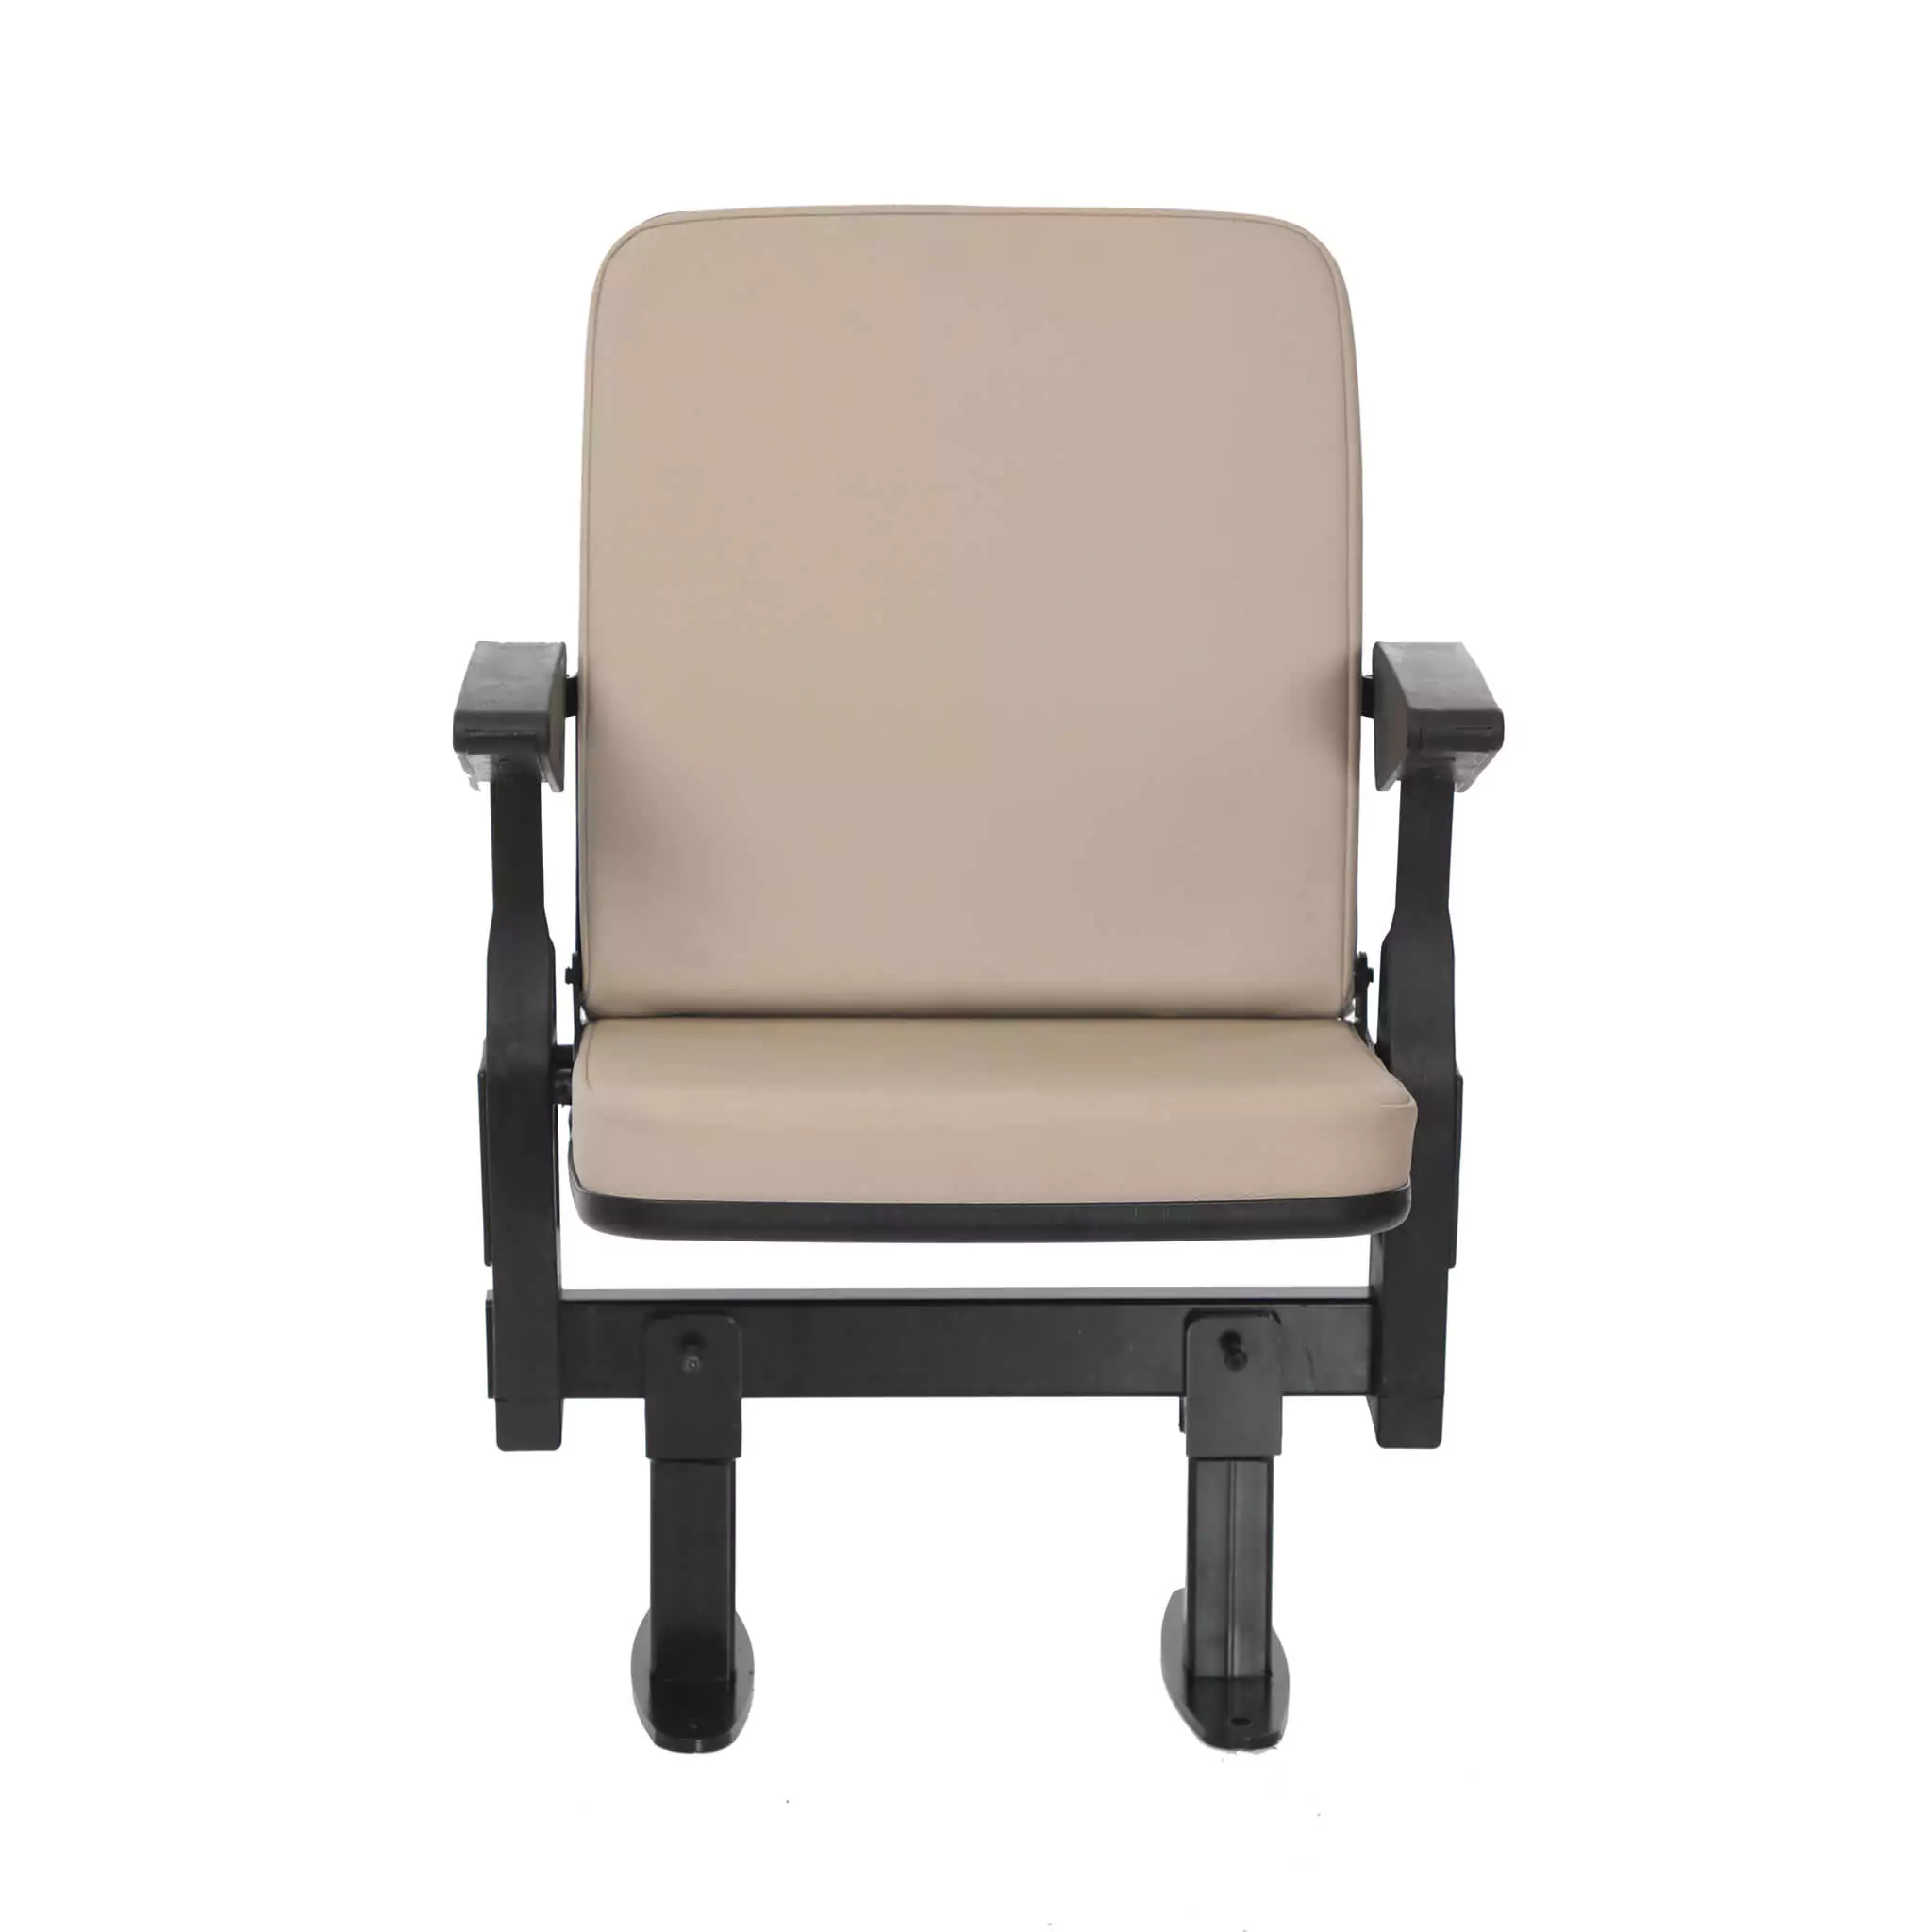 Simko Seating Products